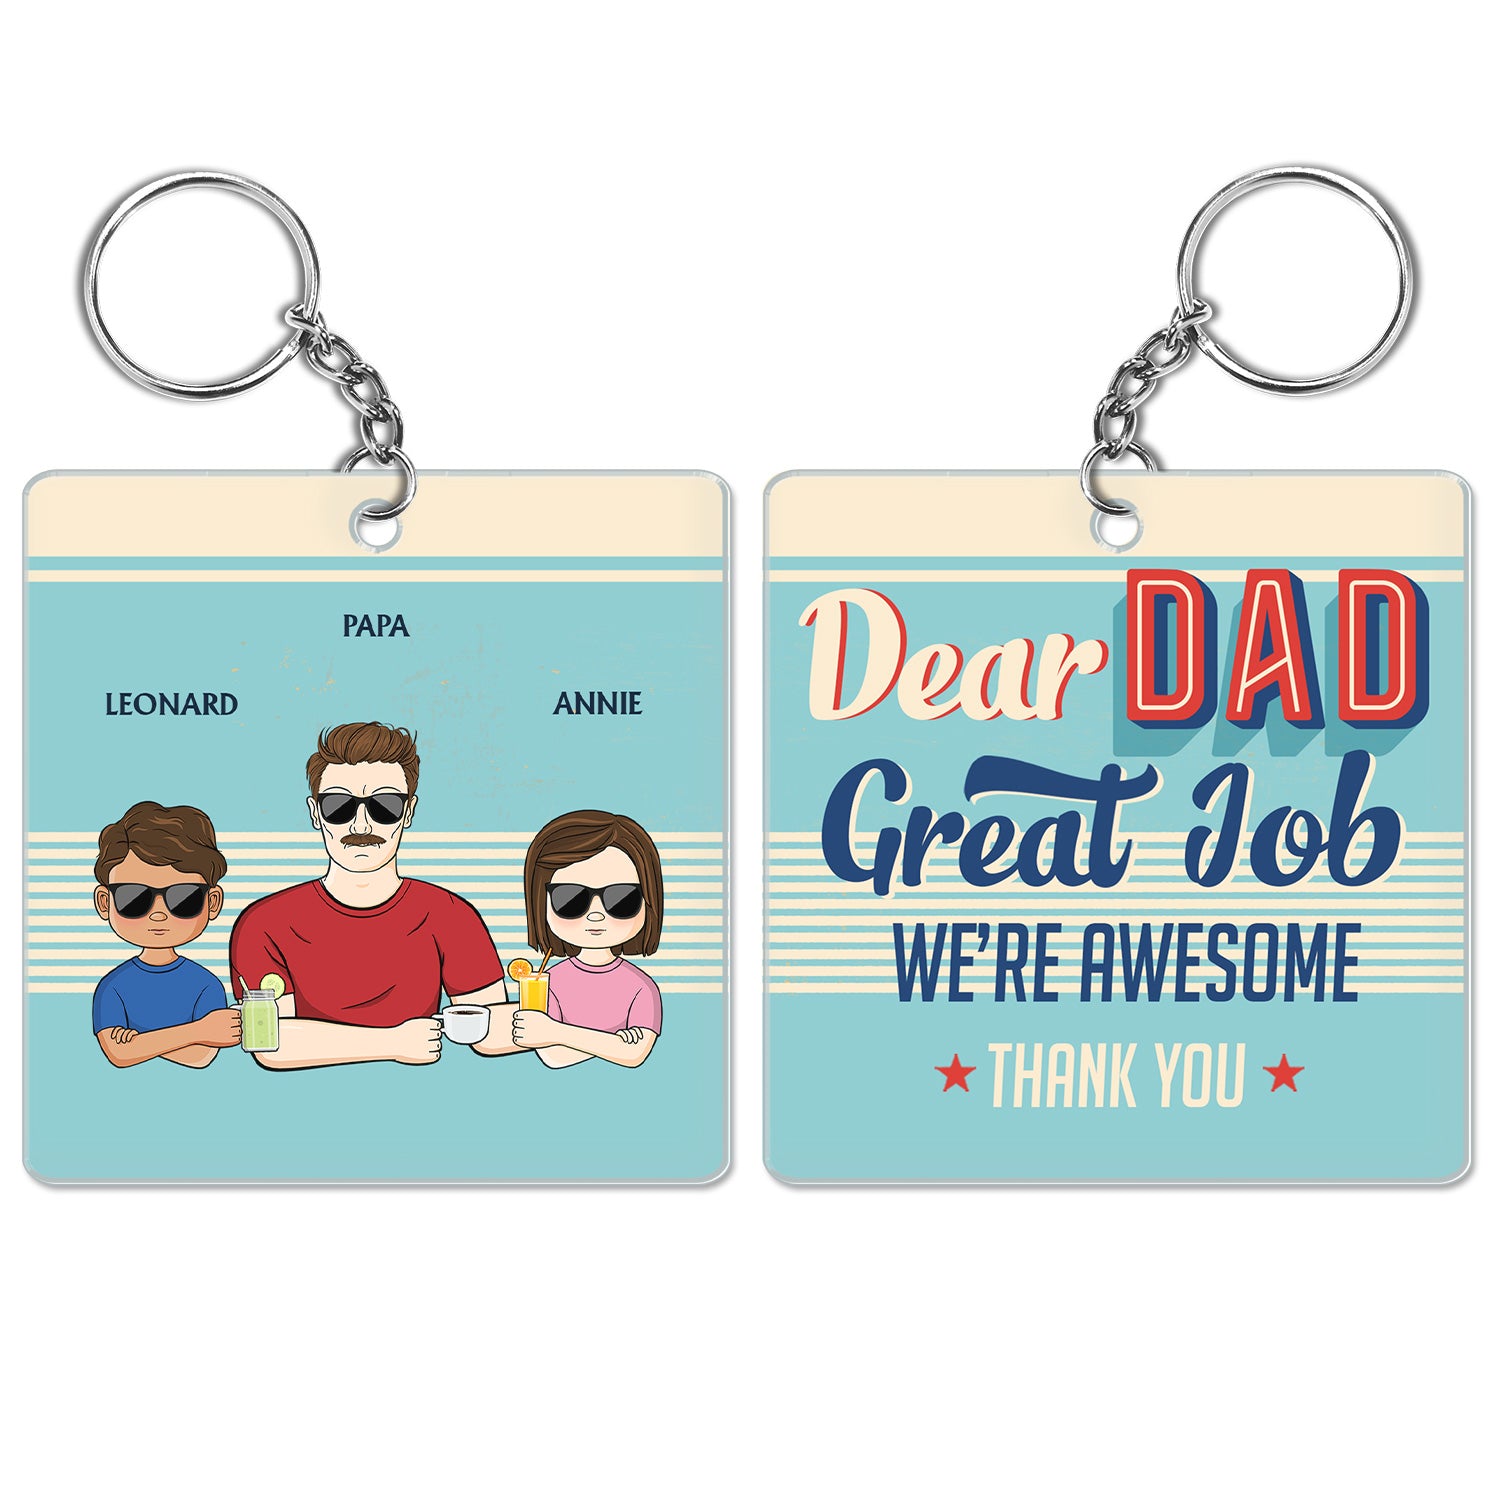 Dear Dad Great Job We're Awesome Thank You Retro Young - Birthday, Loving Gift For Father, Grandpa, Grandfather - Personalized Custom Acrylic Keychain